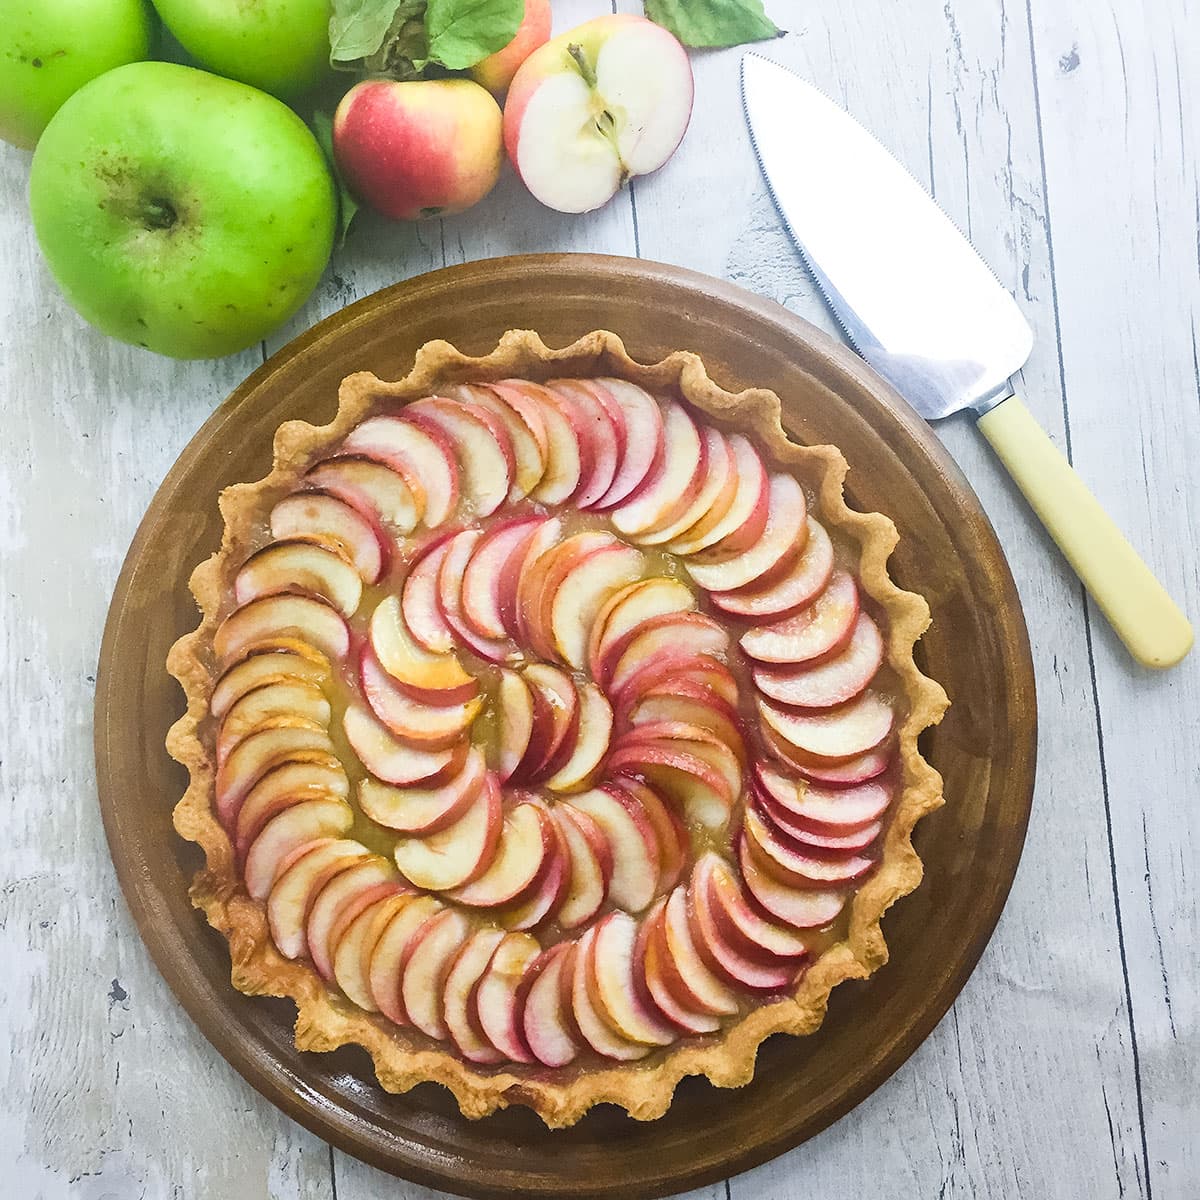 French apple tart with fresh apples and a cake slice on side.